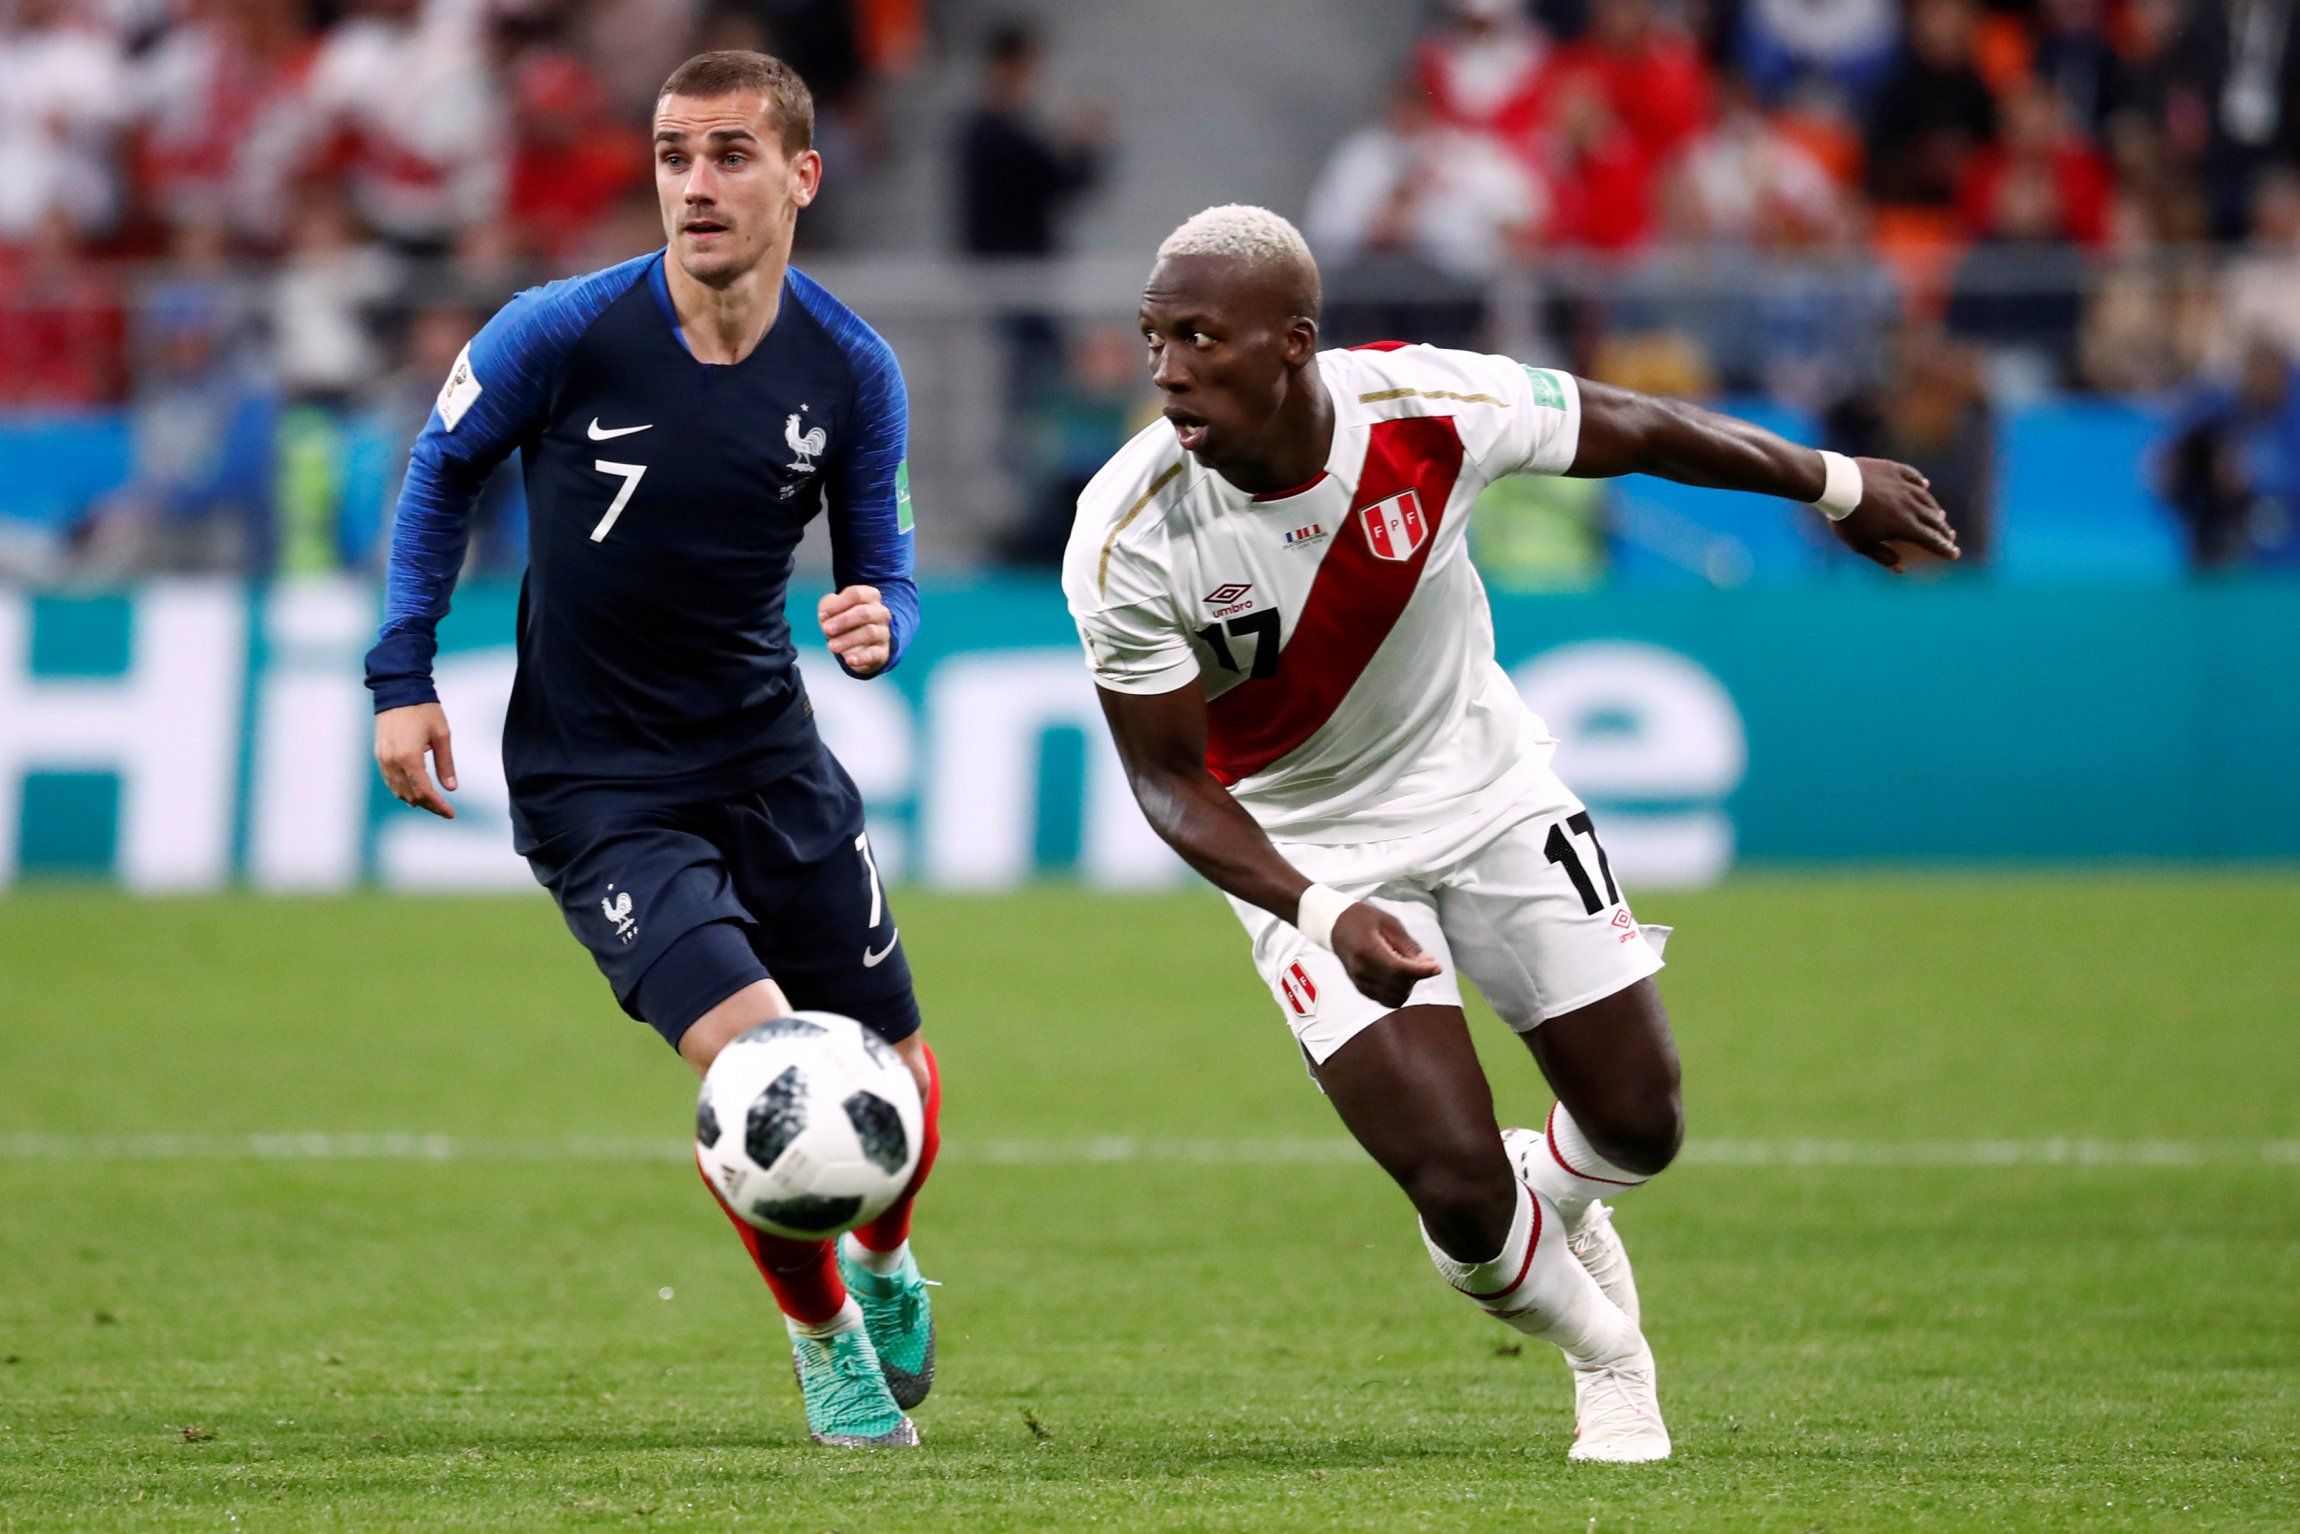 Luis Advincula in action with Antoine Griezmann